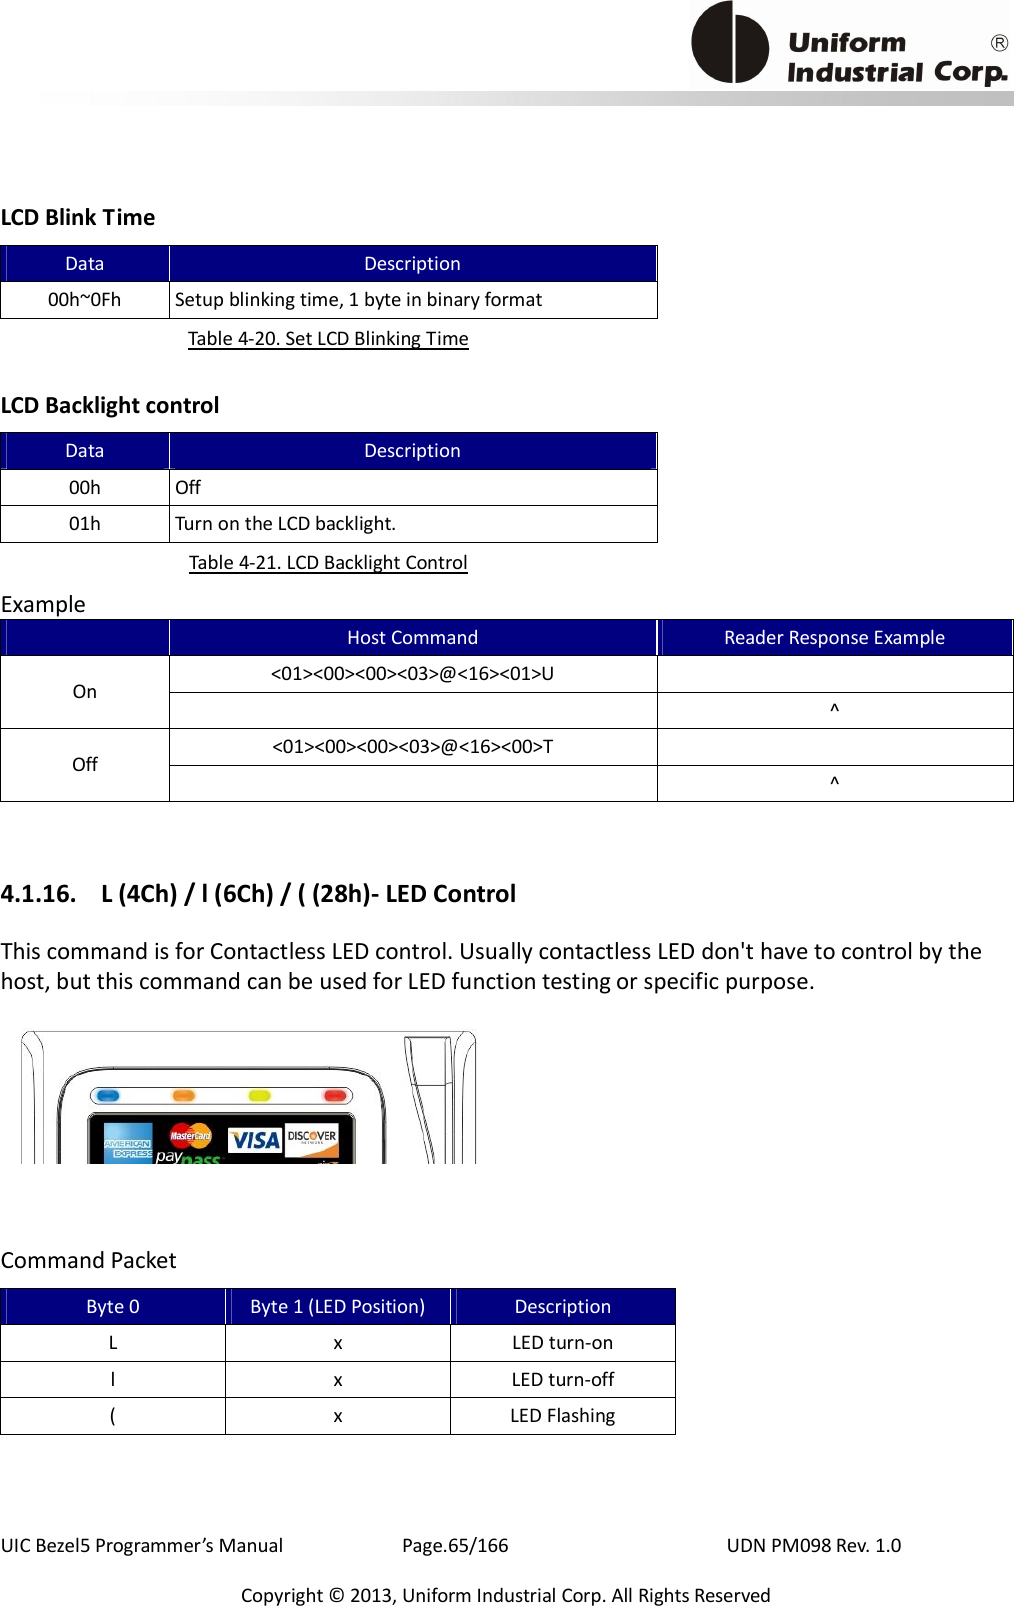                                           UIC Bezel5 Programmer’s Manual      Page.65/166                    UDN PM098 Rev. 1.0 Copyright © 2013, Uniform Industrial Corp. All Rights Reserved LCD Blink Time Data Description 00h~0Fh  Setup blinking time, 1 byte in binary format Table 4-20. Set LCD Blinking Time LCD Backlight control Data Description 00h  Off 01h  Turn on the LCD backlight. Table 4-21. LCD Backlight Control Example   Host Command  Reader Response Example &lt;01&gt;&lt;00&gt;&lt;00&gt;&lt;03&gt;@&lt;16&gt;&lt;01&gt;U   On    ^ &lt;01&gt;&lt;00&gt;&lt;00&gt;&lt;03&gt;@&lt;16&gt;&lt;00&gt;T   Off    ^ 4.1.16.   L (4Ch) / l (6Ch) / ( (28h)- LED Control This command is for Contactless LED control. Usually contactless LED don&apos;t have to control by the host, but this command can be used for LED function testing or specific purpose.   Command Packet Byte 0  Byte 1 (LED Position)  Description L  x  LED turn-on l  x  LED turn-off (  x  LED Flashing  